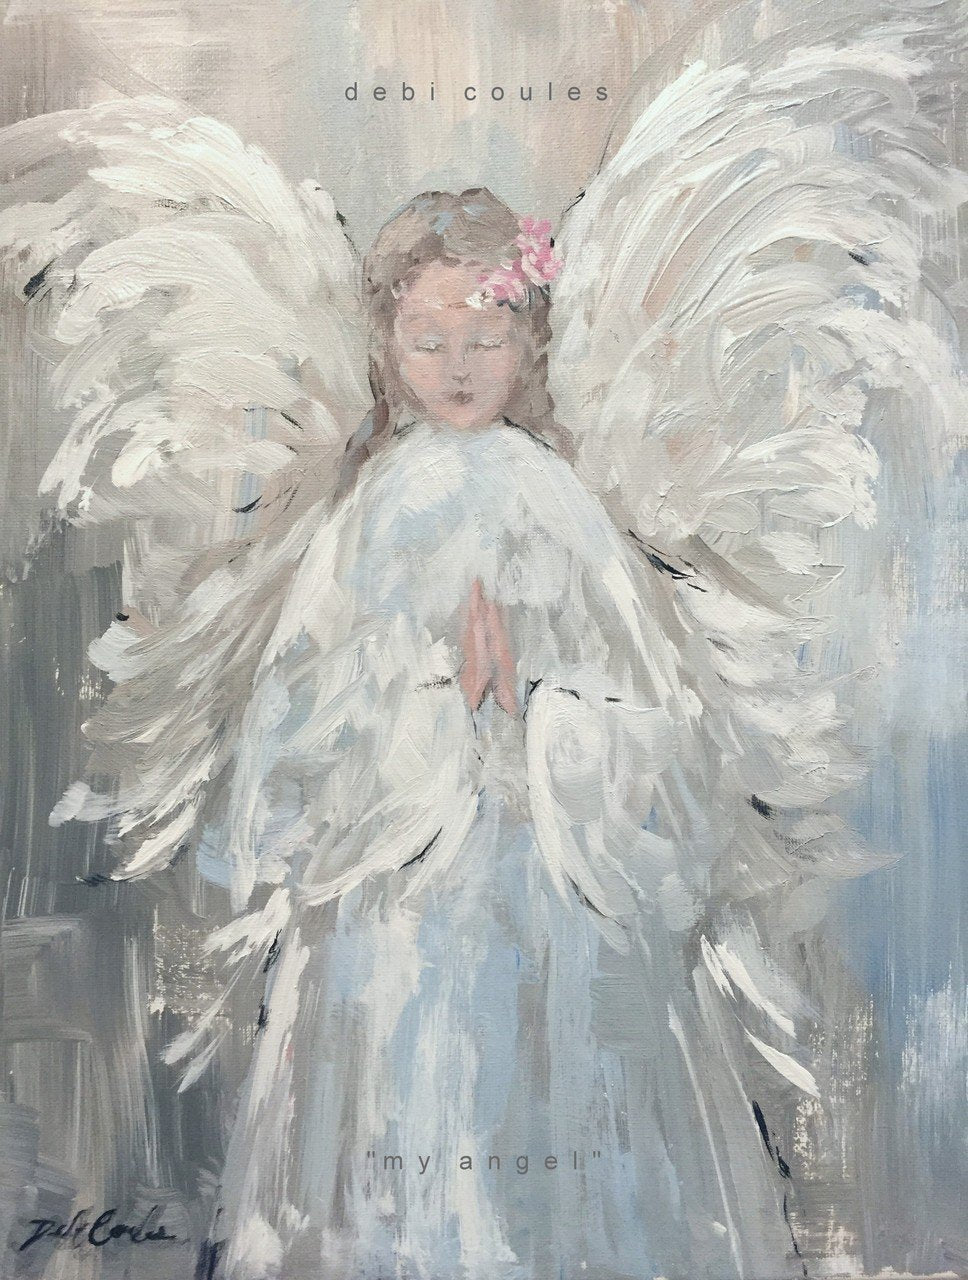 Angel artwork featuring a winged angel adorned with a halo of roses and look of serenity with her hands gently clasped in prayer. Painted in a shabby chic style and printed on canvas.